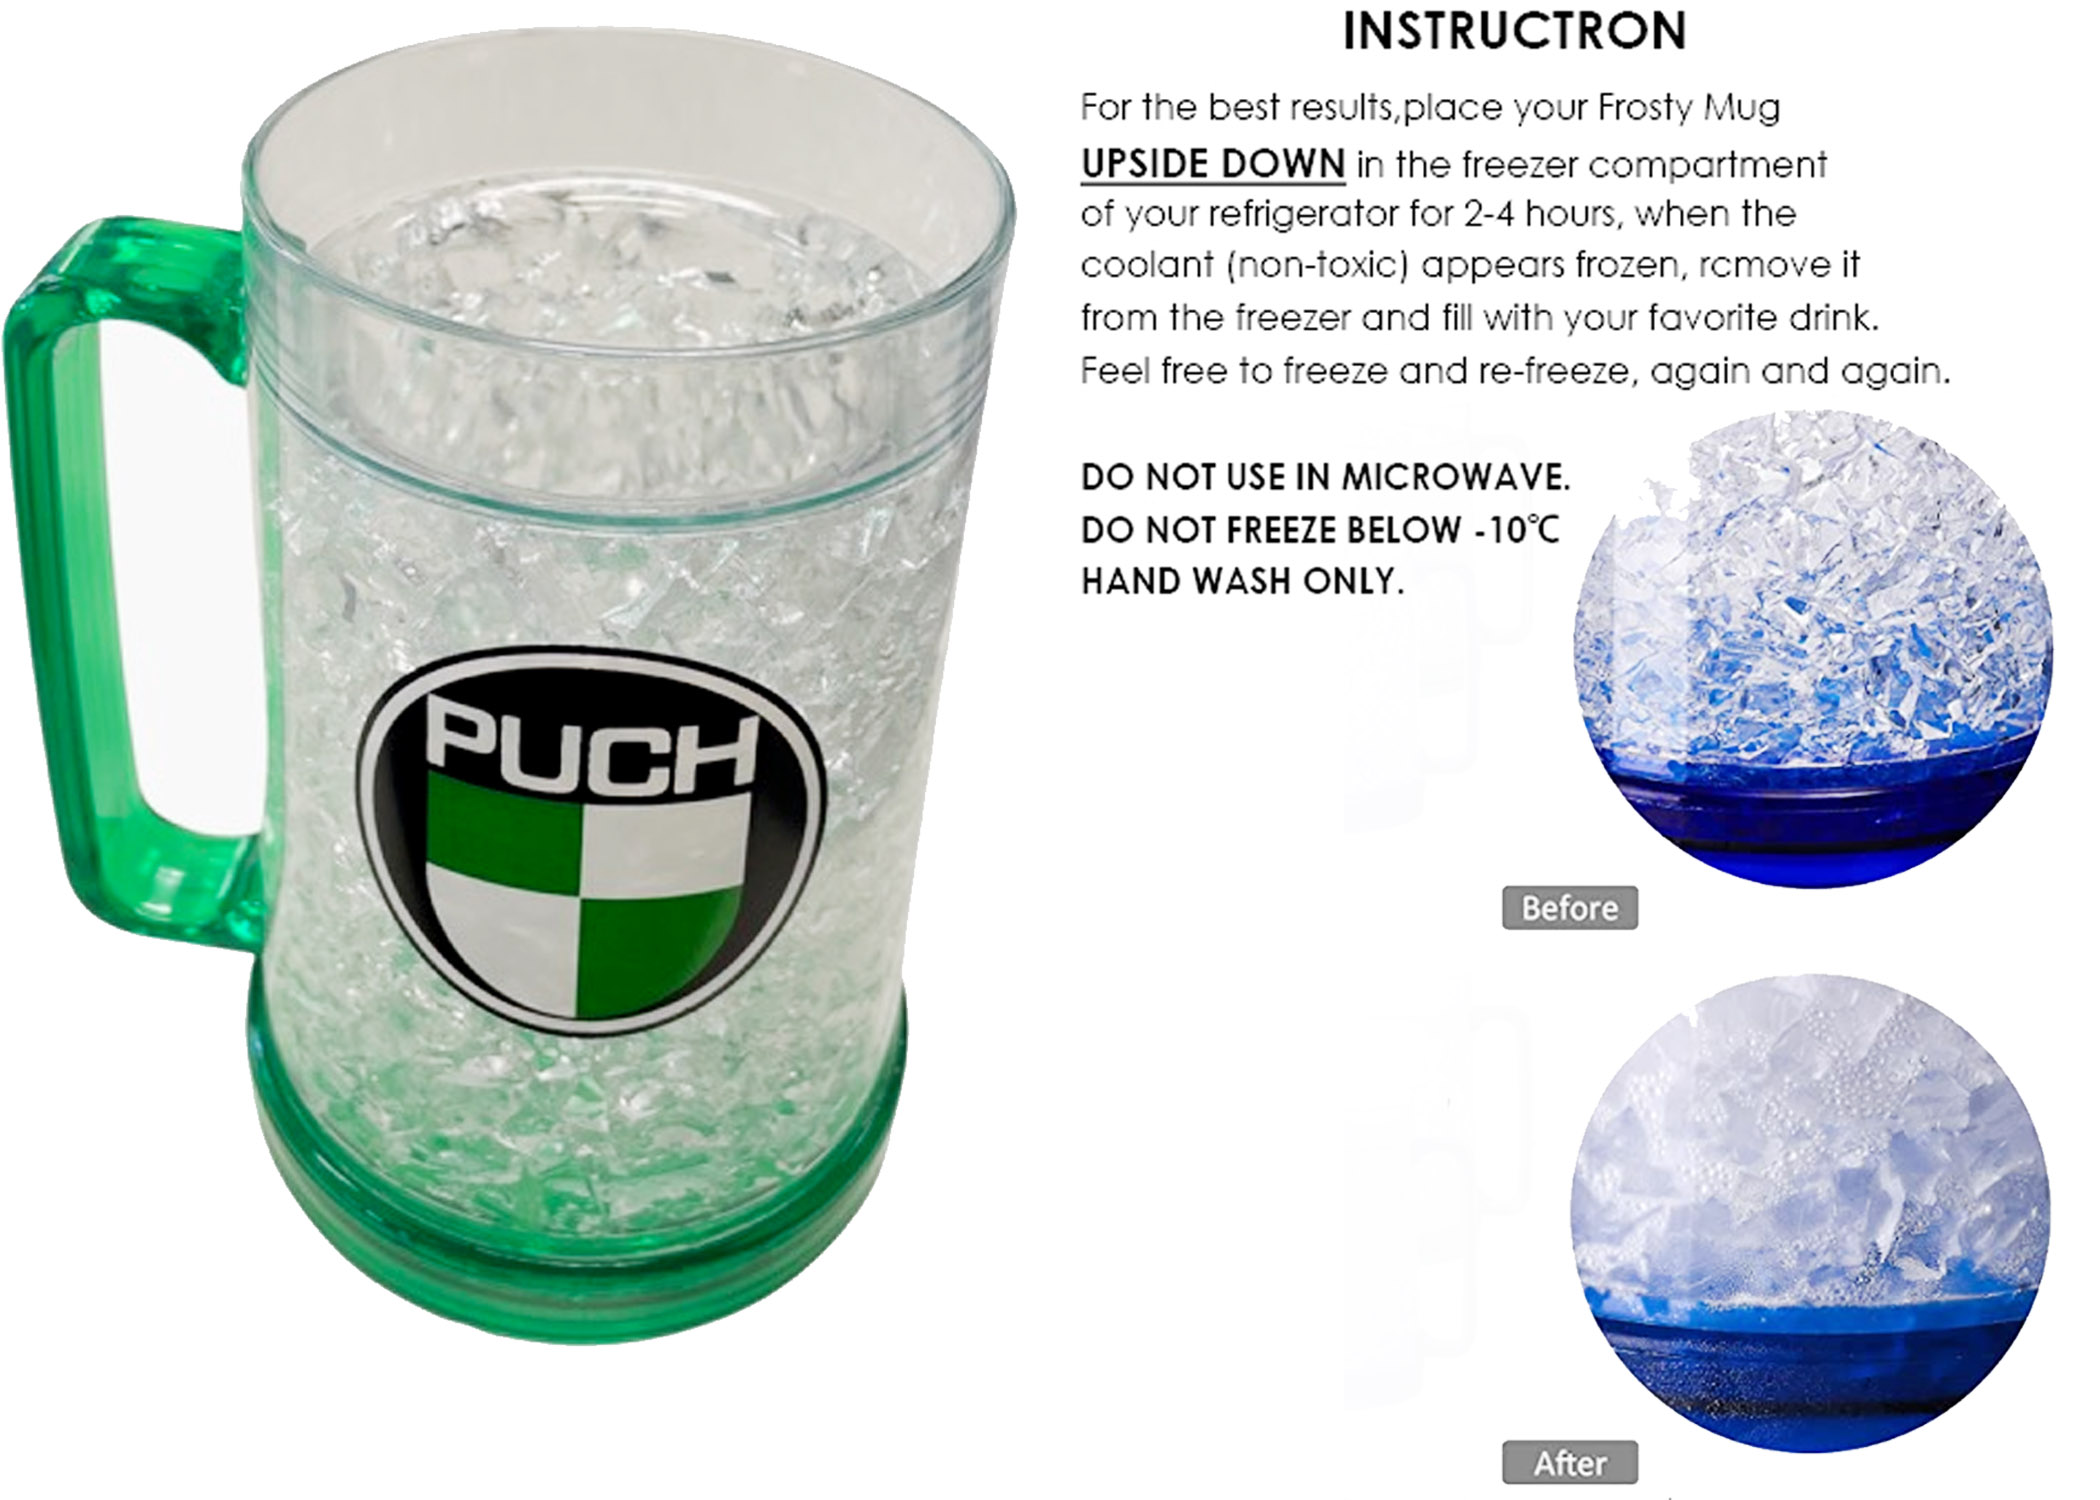 PUCH Beer mug / cup / frosty mug with logo - 450 ML double walled - Ideal on hot days and beer parties - place in the freezer 2 - 3 hours and the mug is ice cold (see attached instructions)  freezing gel 